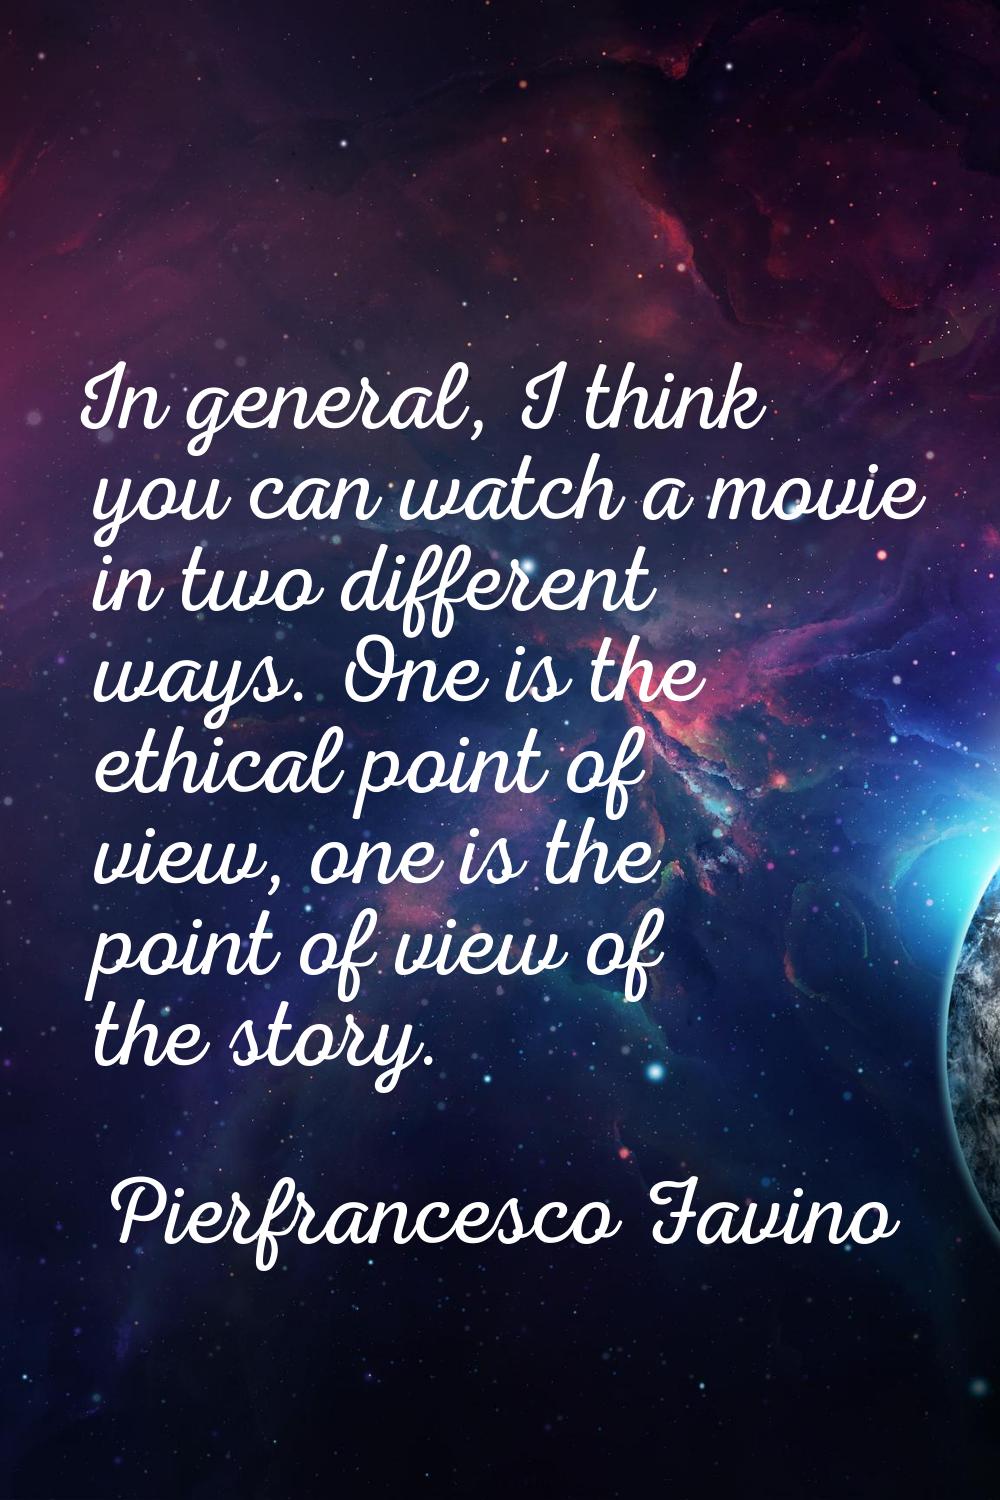 In general, I think you can watch a movie in two different ways. One is the ethical point of view, 